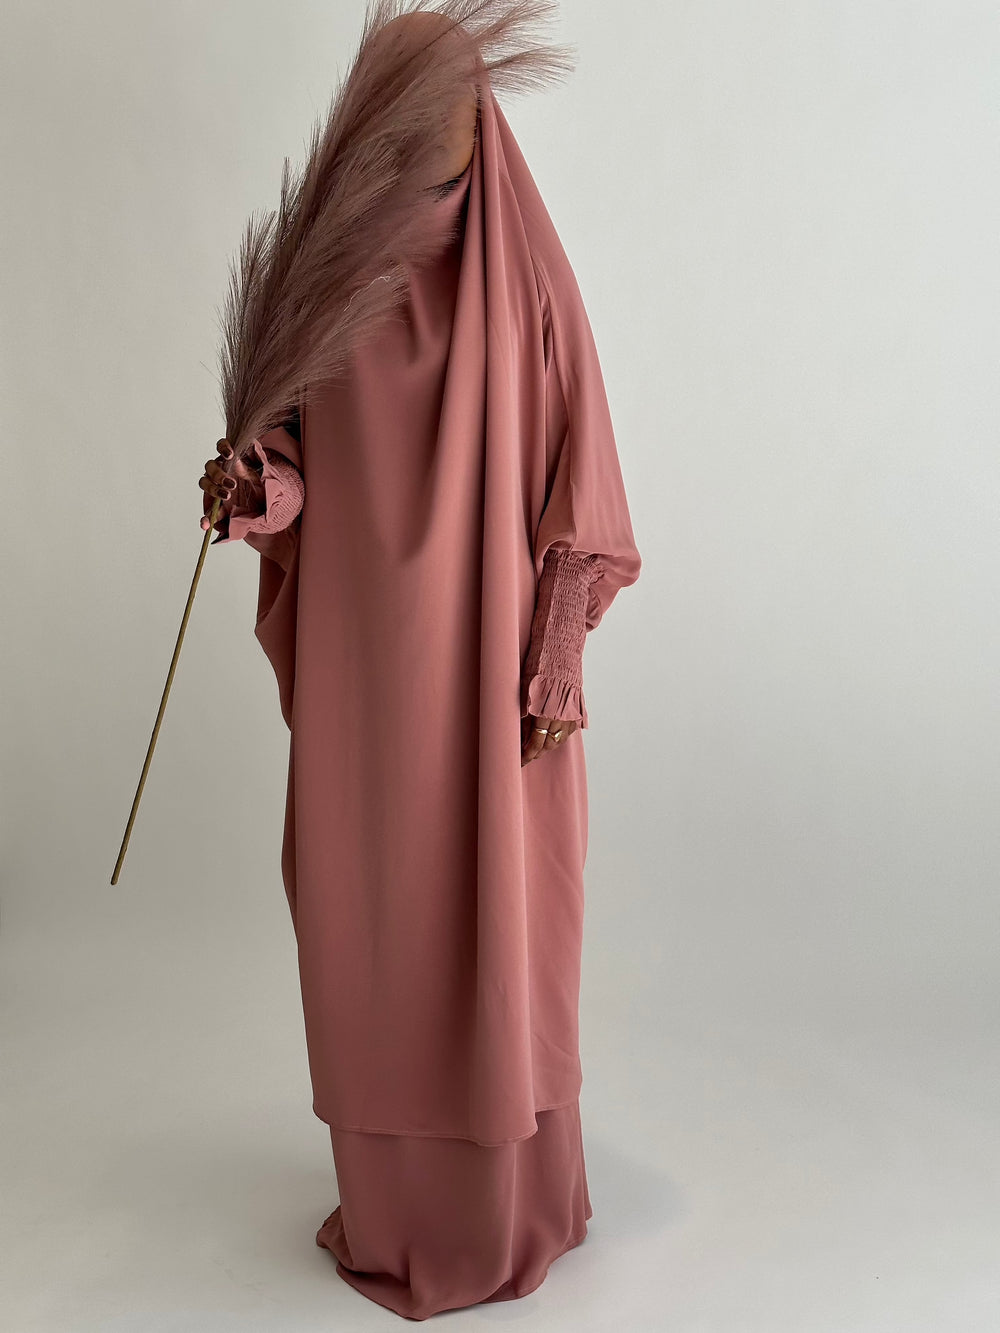 Get trendy with Medina 2-piece Jilbab - Pink Salmon -  available at Voilee NY. Grab yours for $34.90 today!